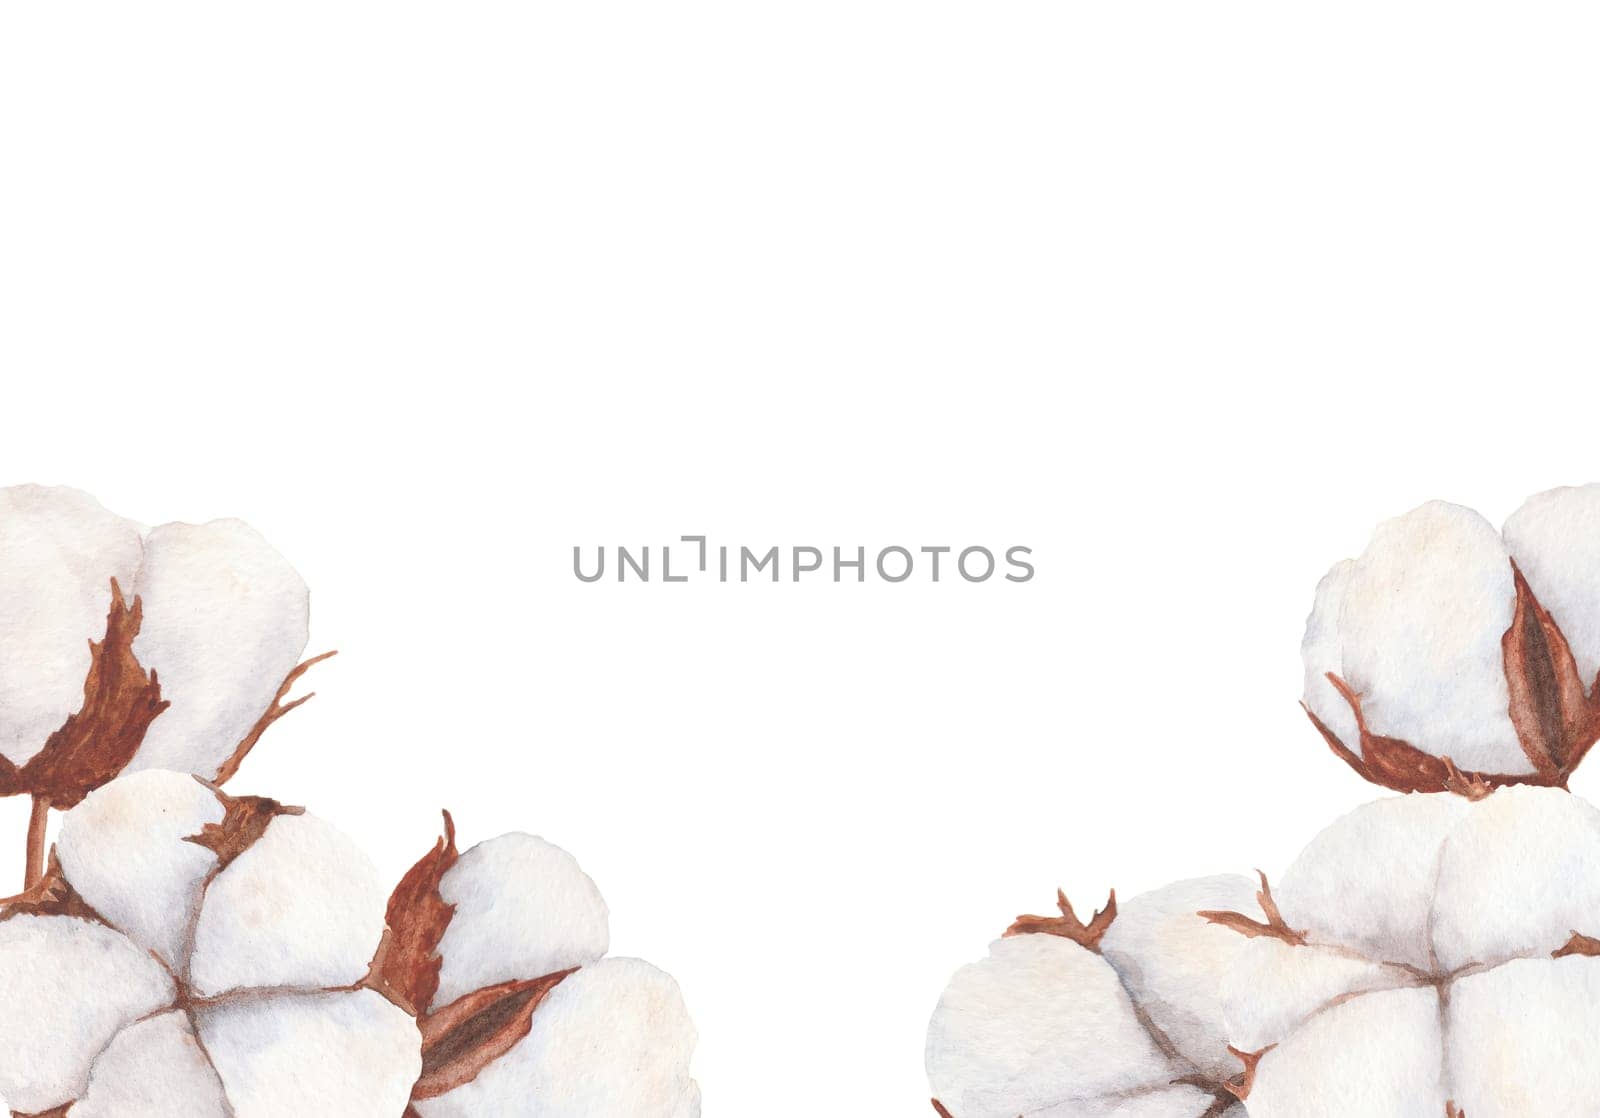 Cotton bolls watercolor illustration isolated on white background. Hand drawn frame by florainlove_art